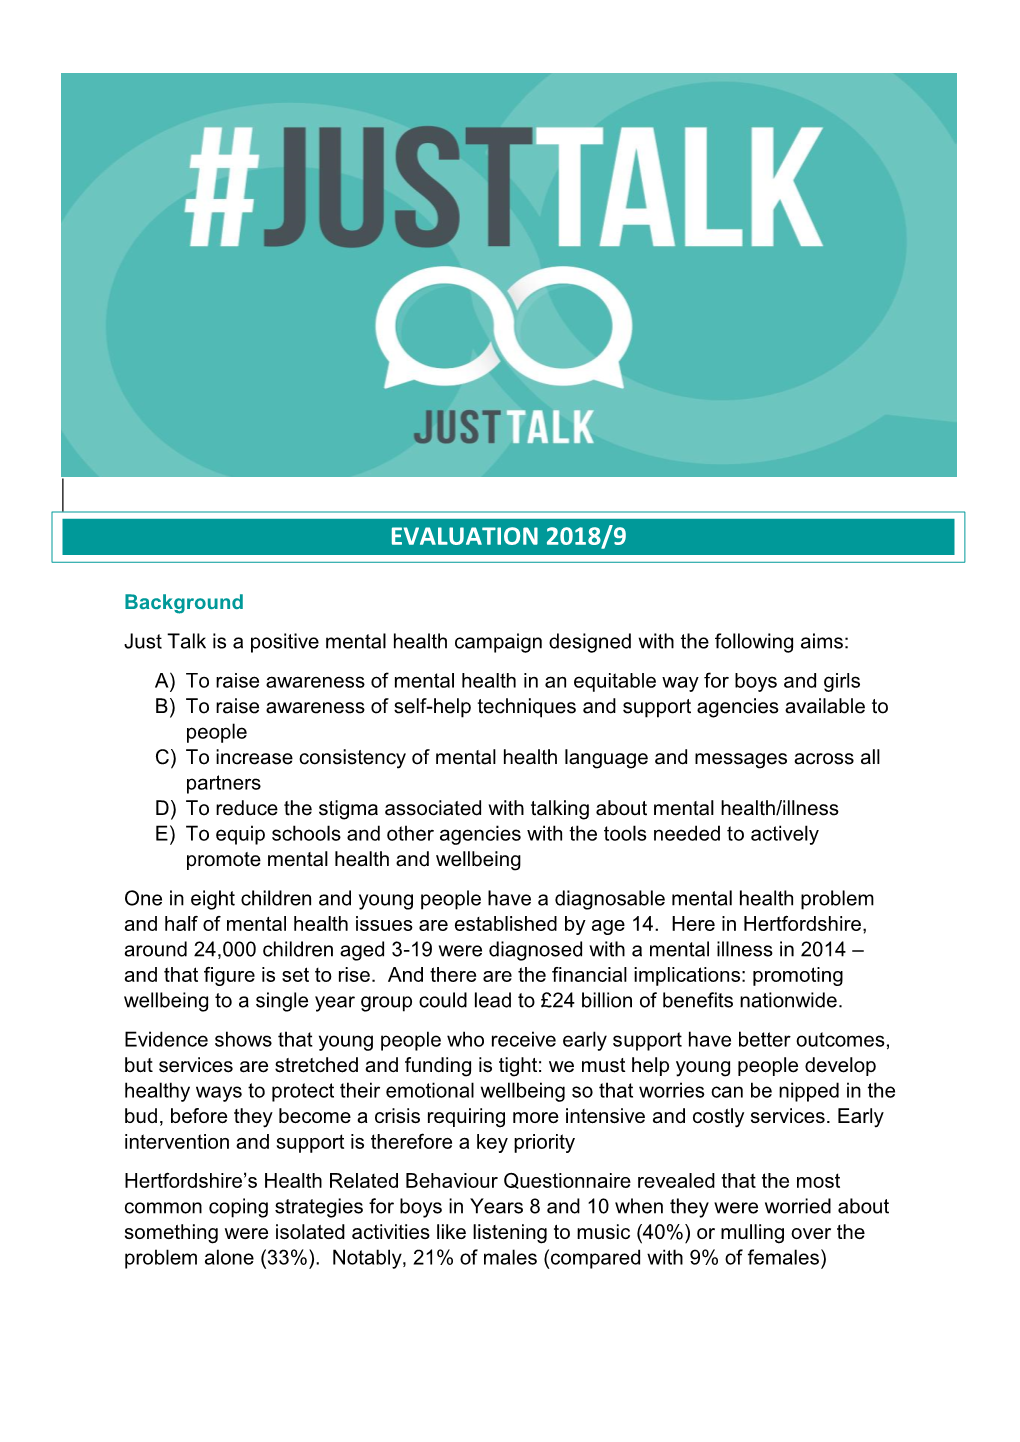 Read the Just Talk 2018-19 Evaluation